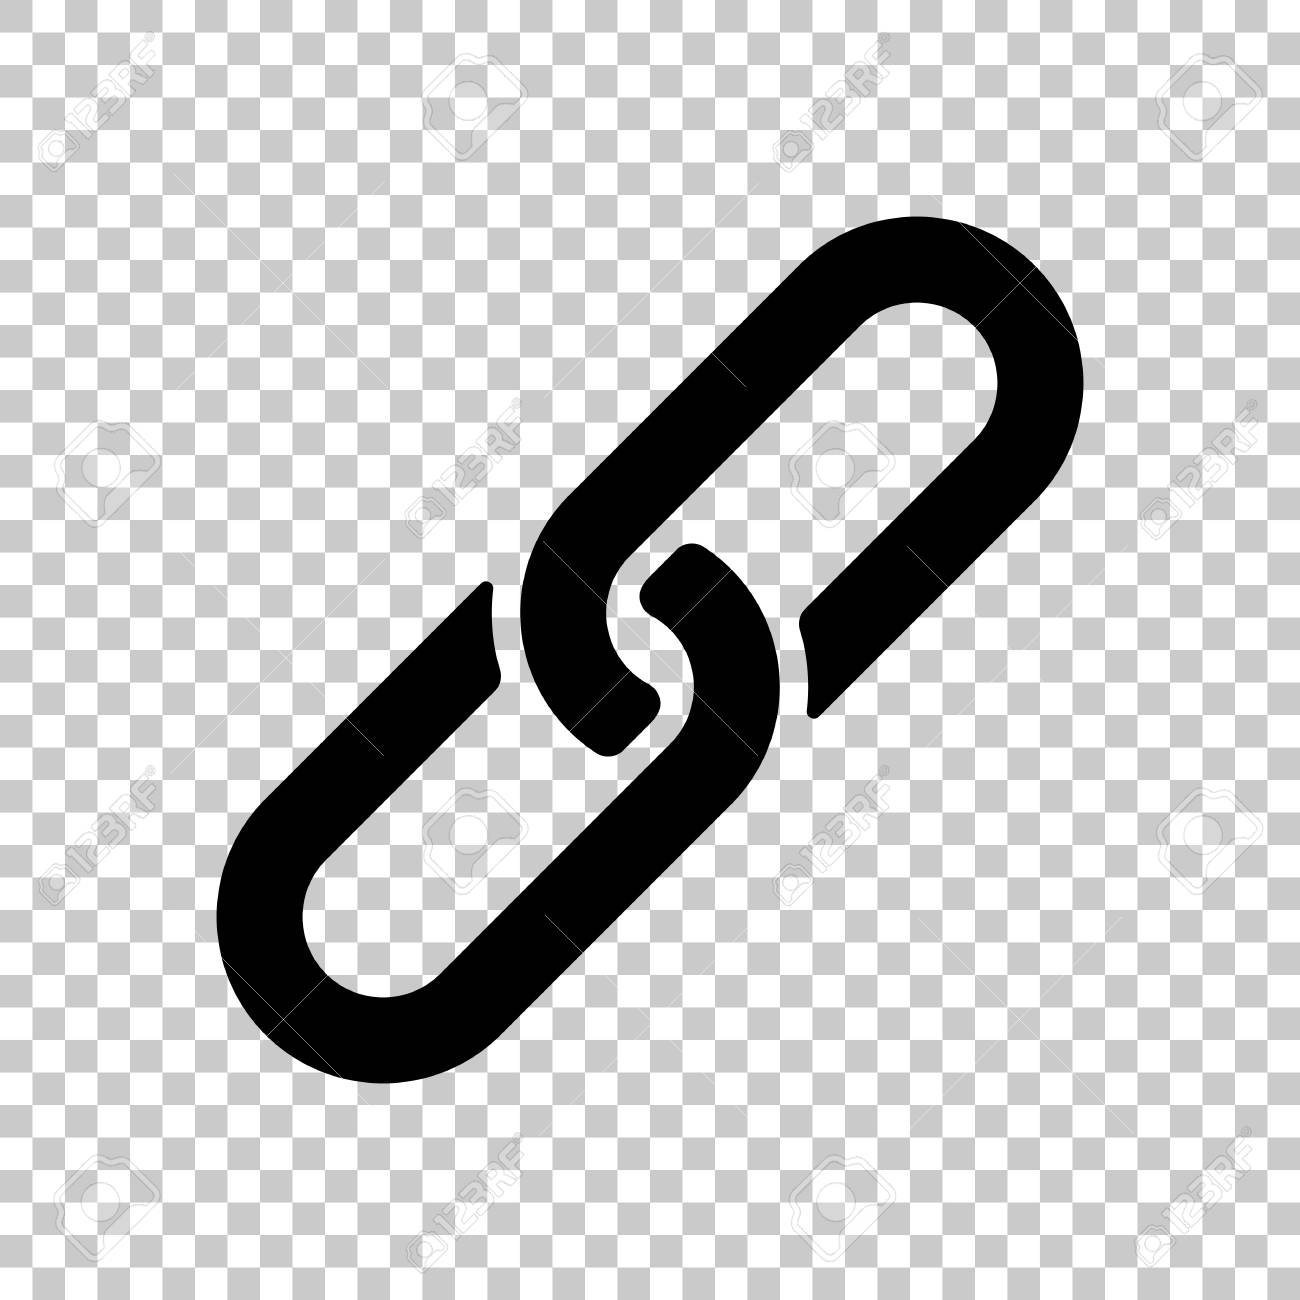 Link Icon Hyperlink Chain Symbol Simple On Transparent